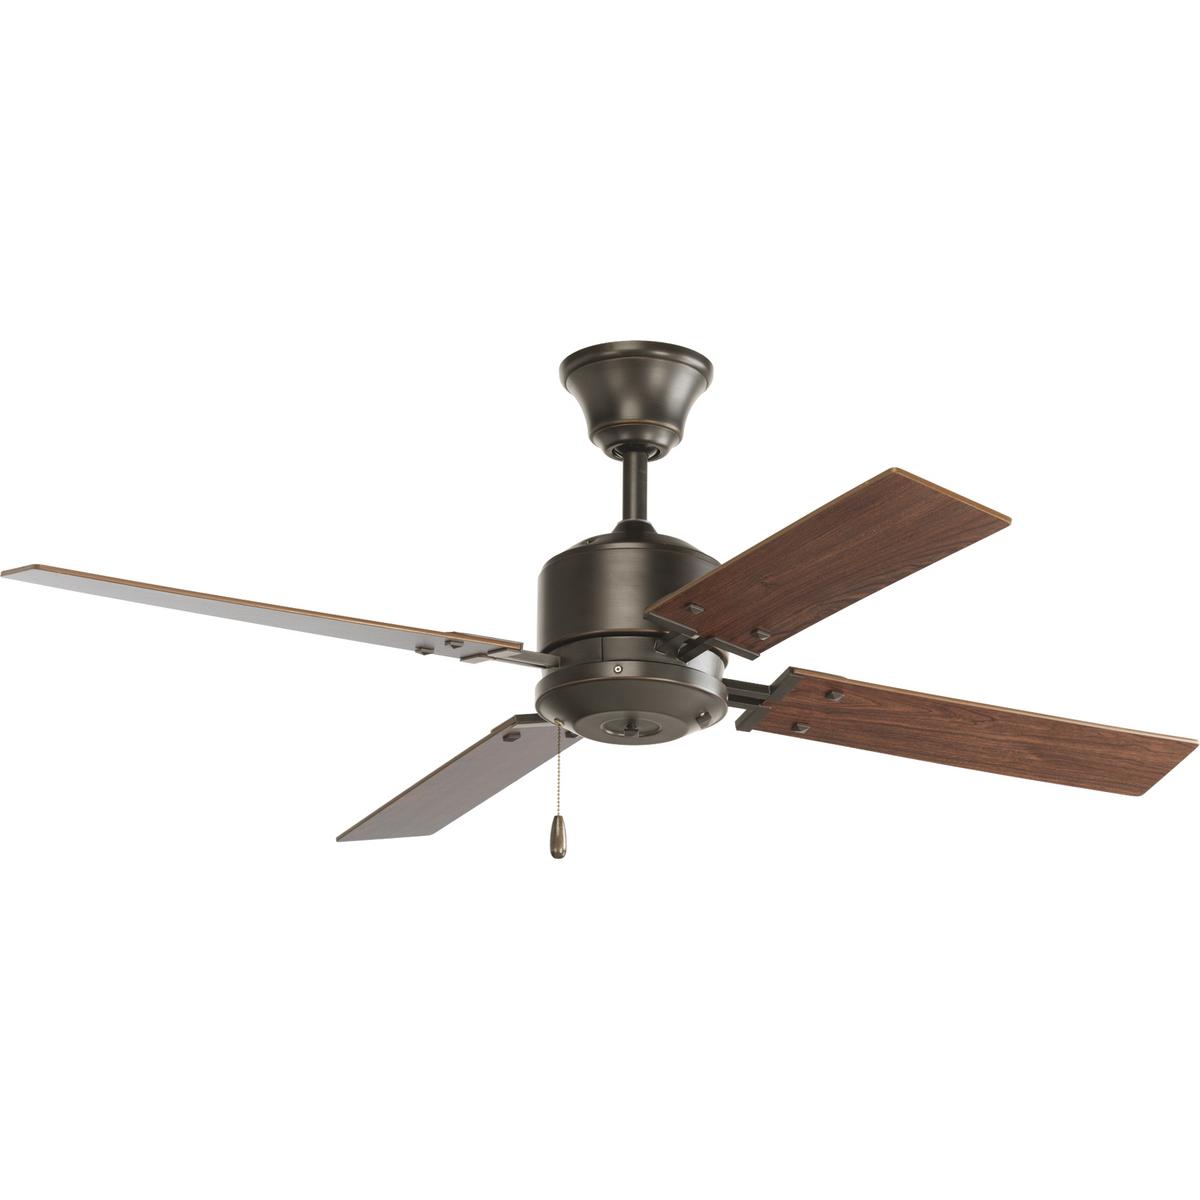 Hubbell P2531-20 52" four-blade Fan with reversible Medium Cherry/Classic Walnut blades and an Antique Bronze finish. The Clifton Heights ceiling fan offers great performance and value. This contemporary styled fan features a powerful, 3-speed motor that can be reversed t